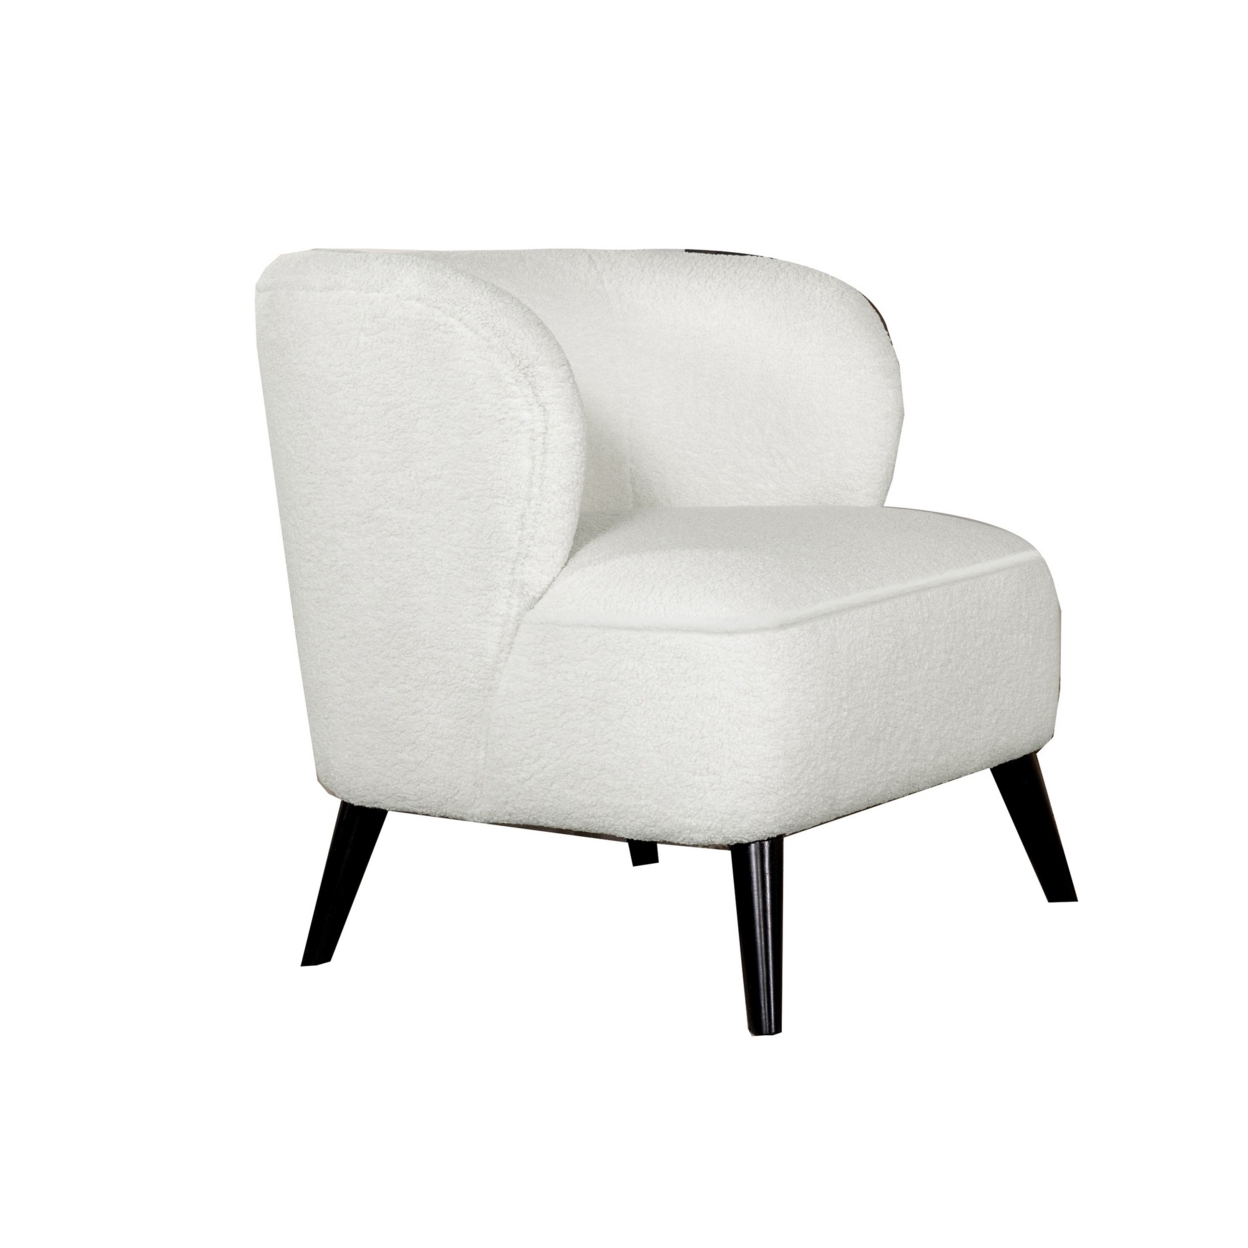 31 Inch Modern Accent Chair With Barrel Seat, Wingback, Slender Legs, White